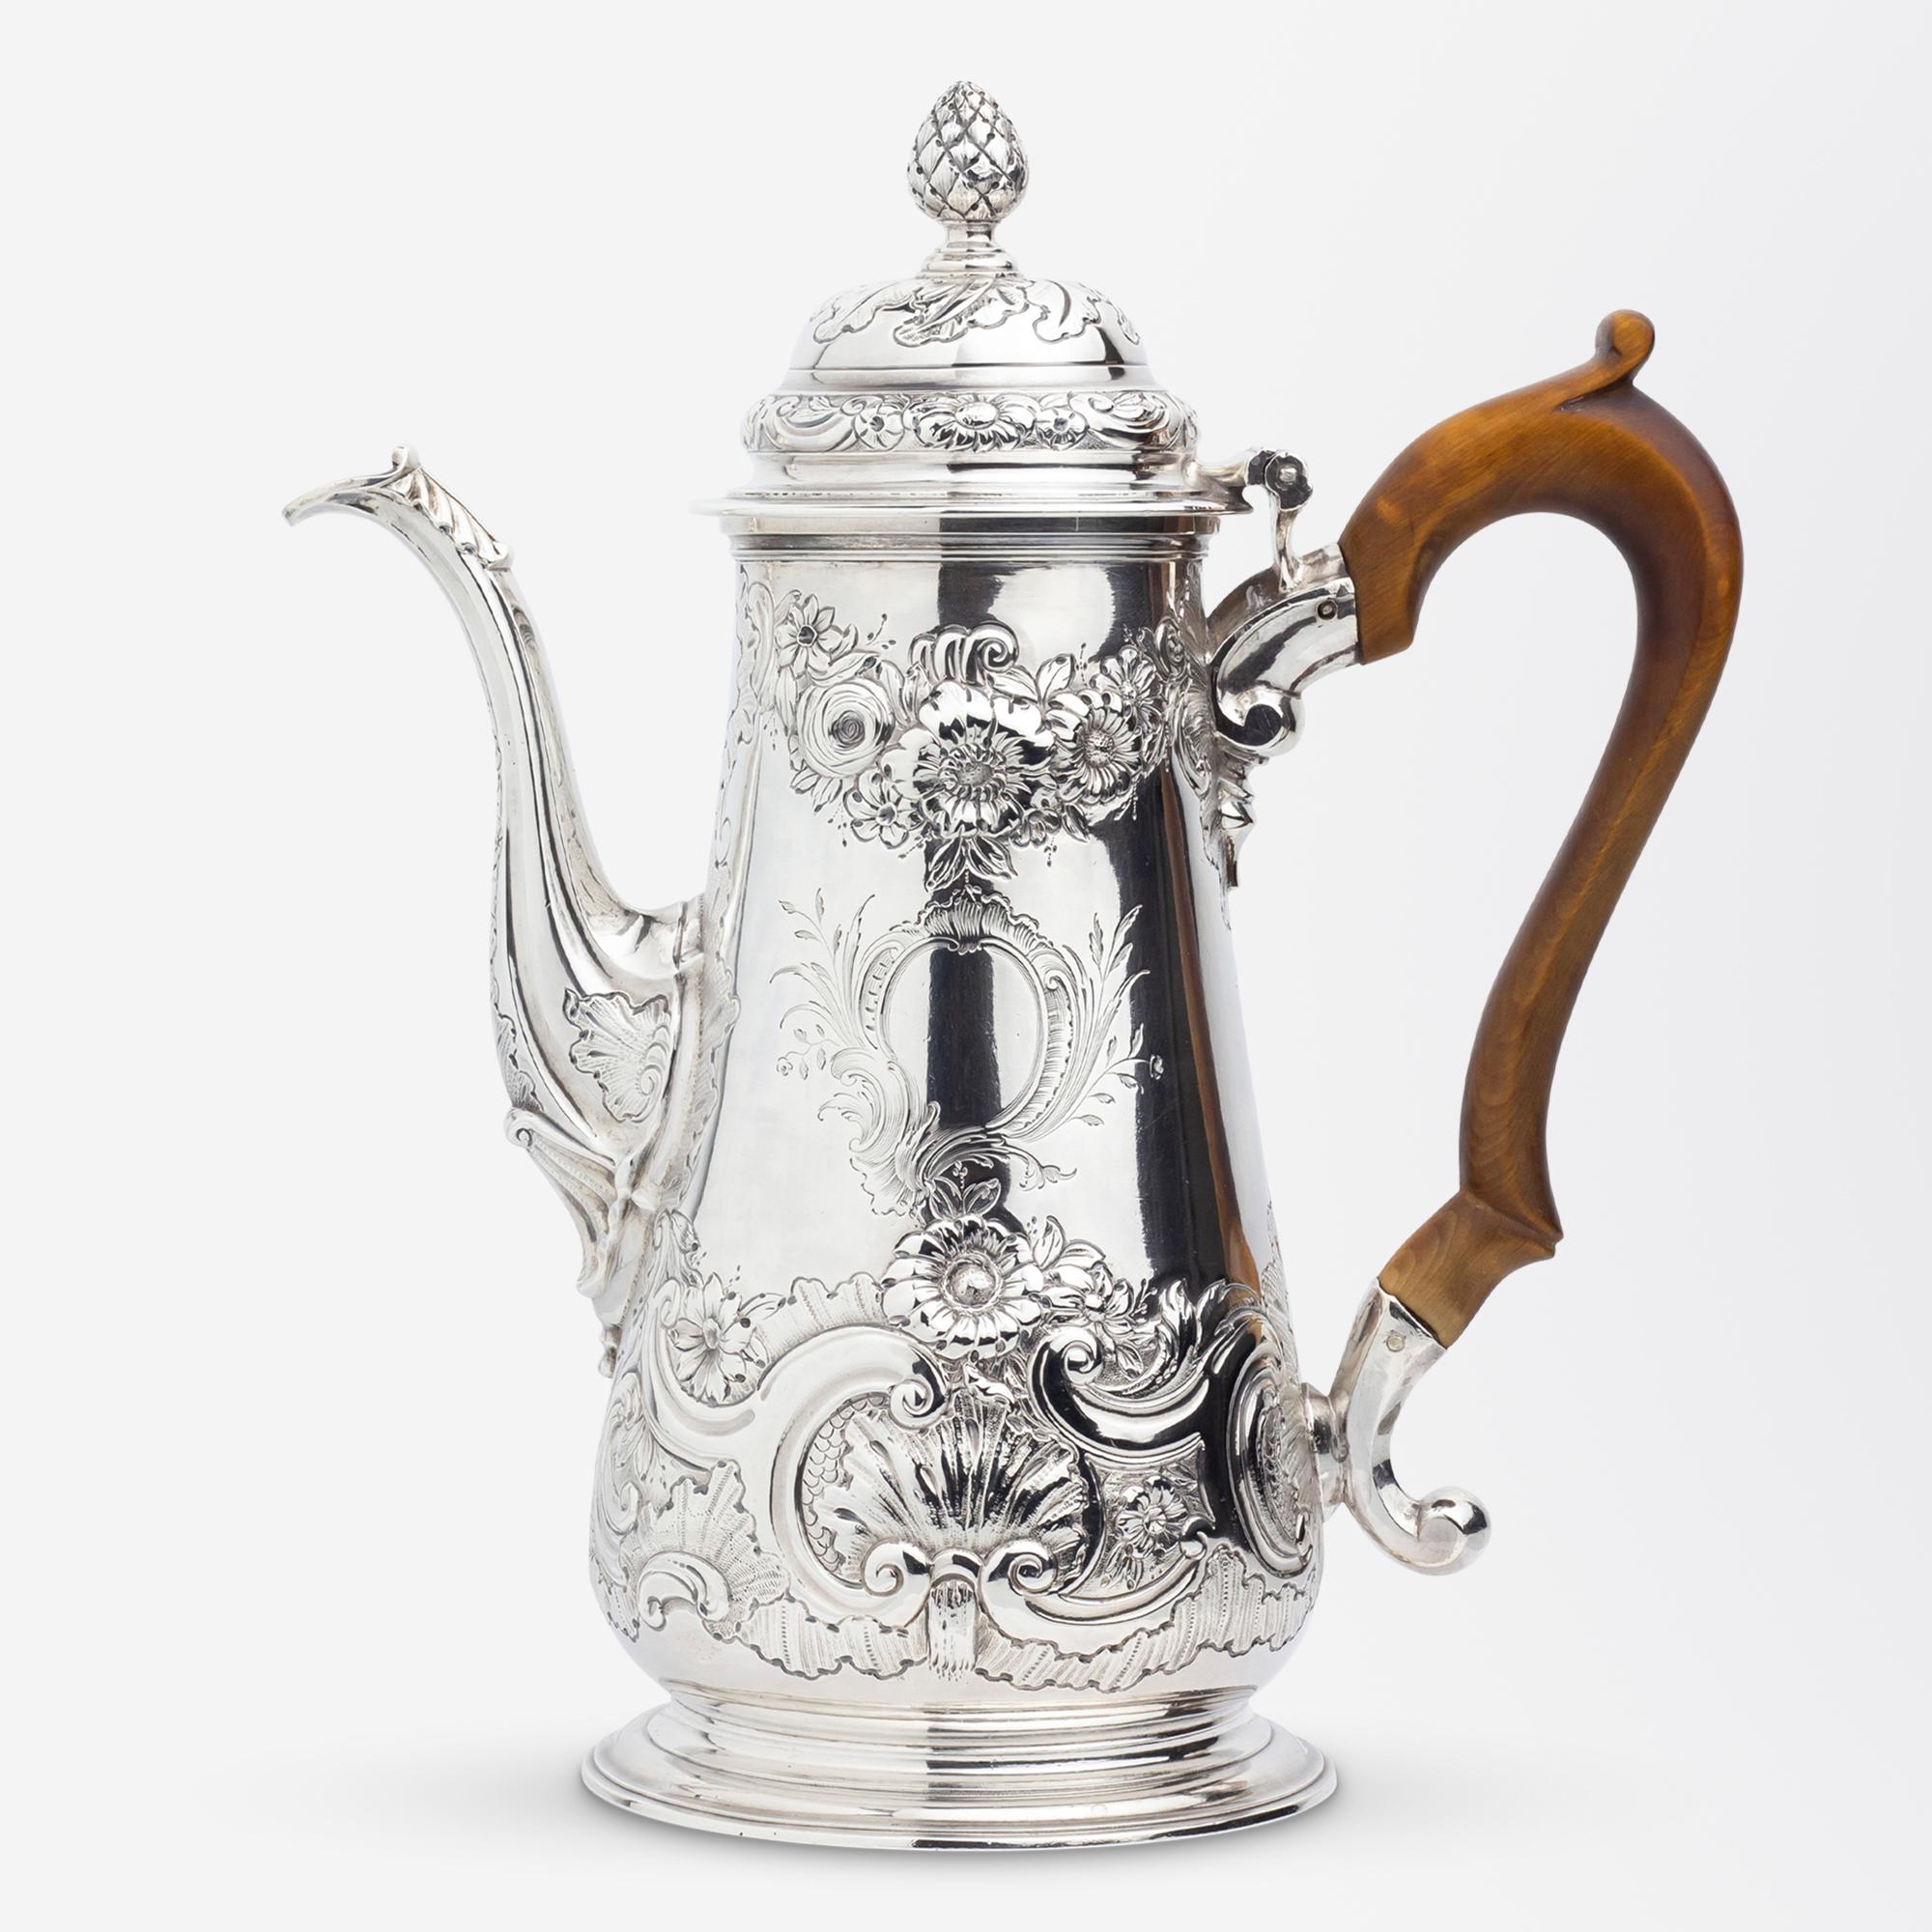 This tall George II period sterling silver coffee pot is decorated with elegant floral repousse details and features a blonde timber handle. To the side of the coffee pot there is a blank cartouche which remains free of a heraldic crest or a